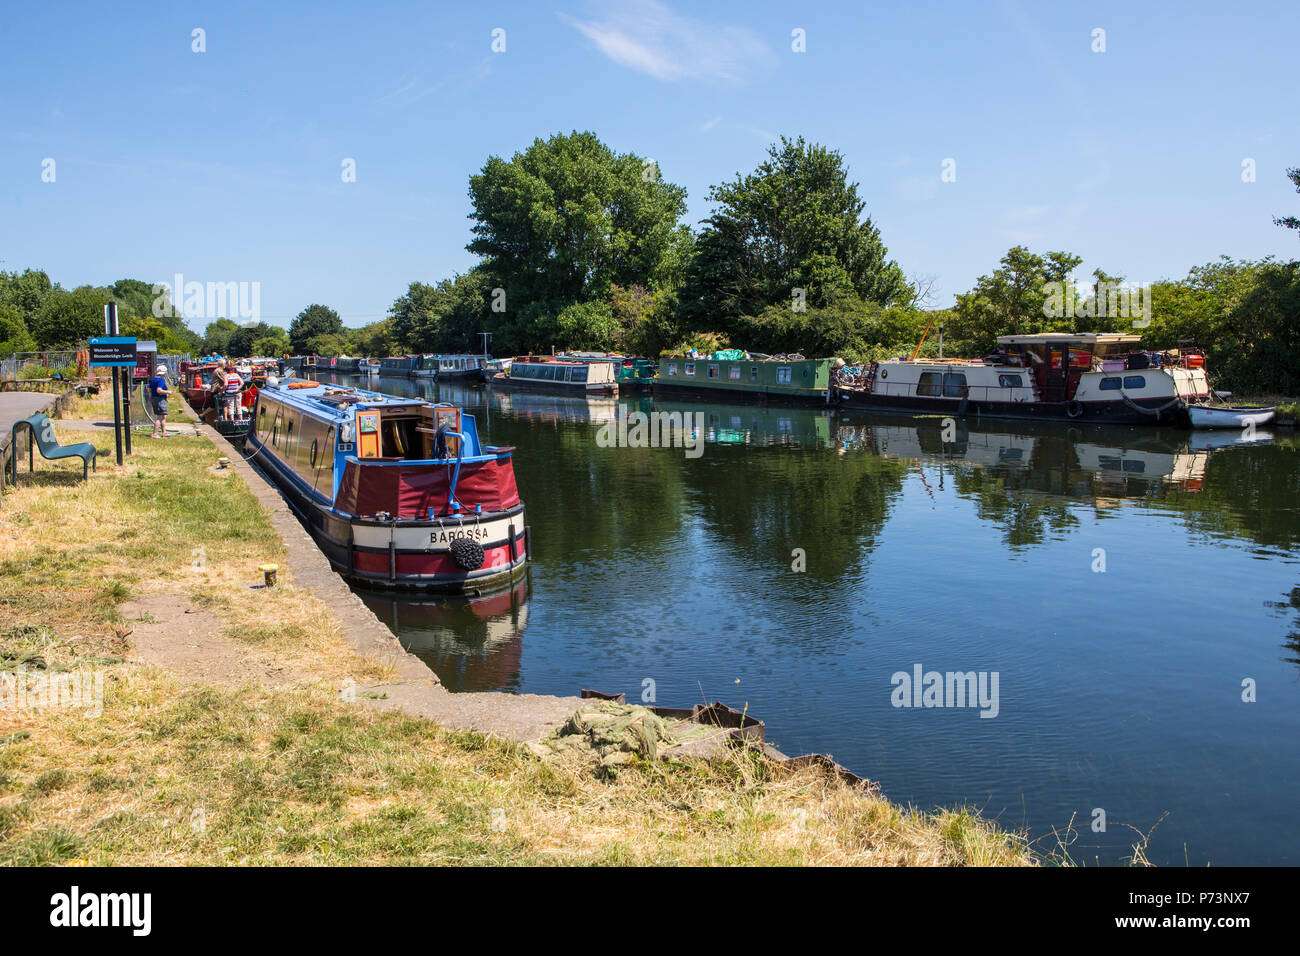 LONDON, UK - JULY 3RD 2018: A view of the House Boats moored on the River Lea at Stonebridge Lock in Tottenham, London, on 3rd July 2018. Stock Photo